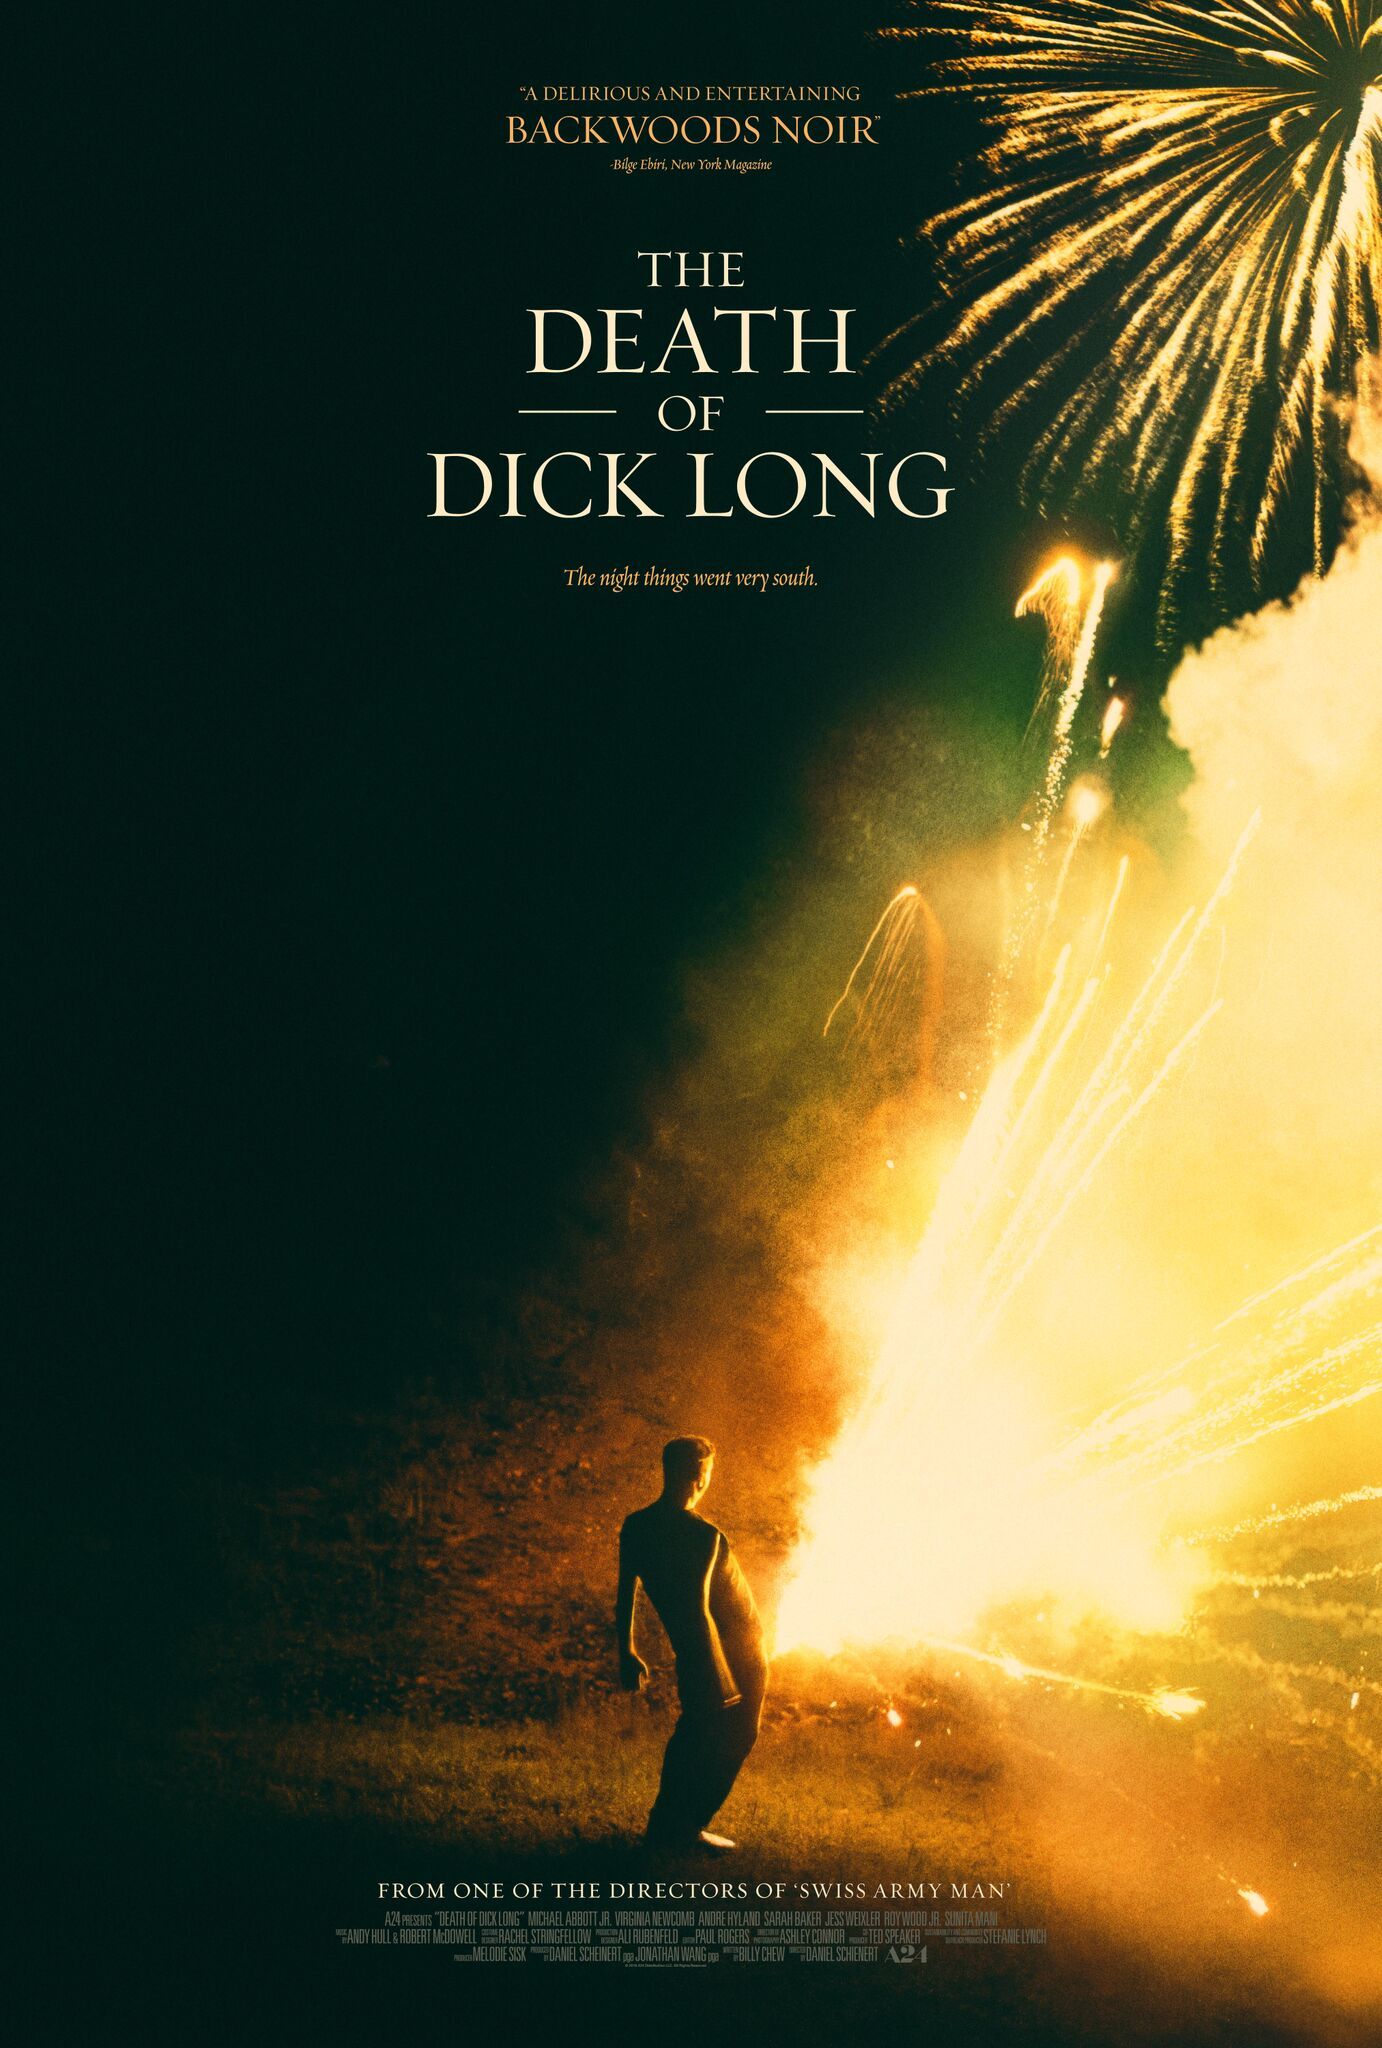 The Death of Dick Long Image